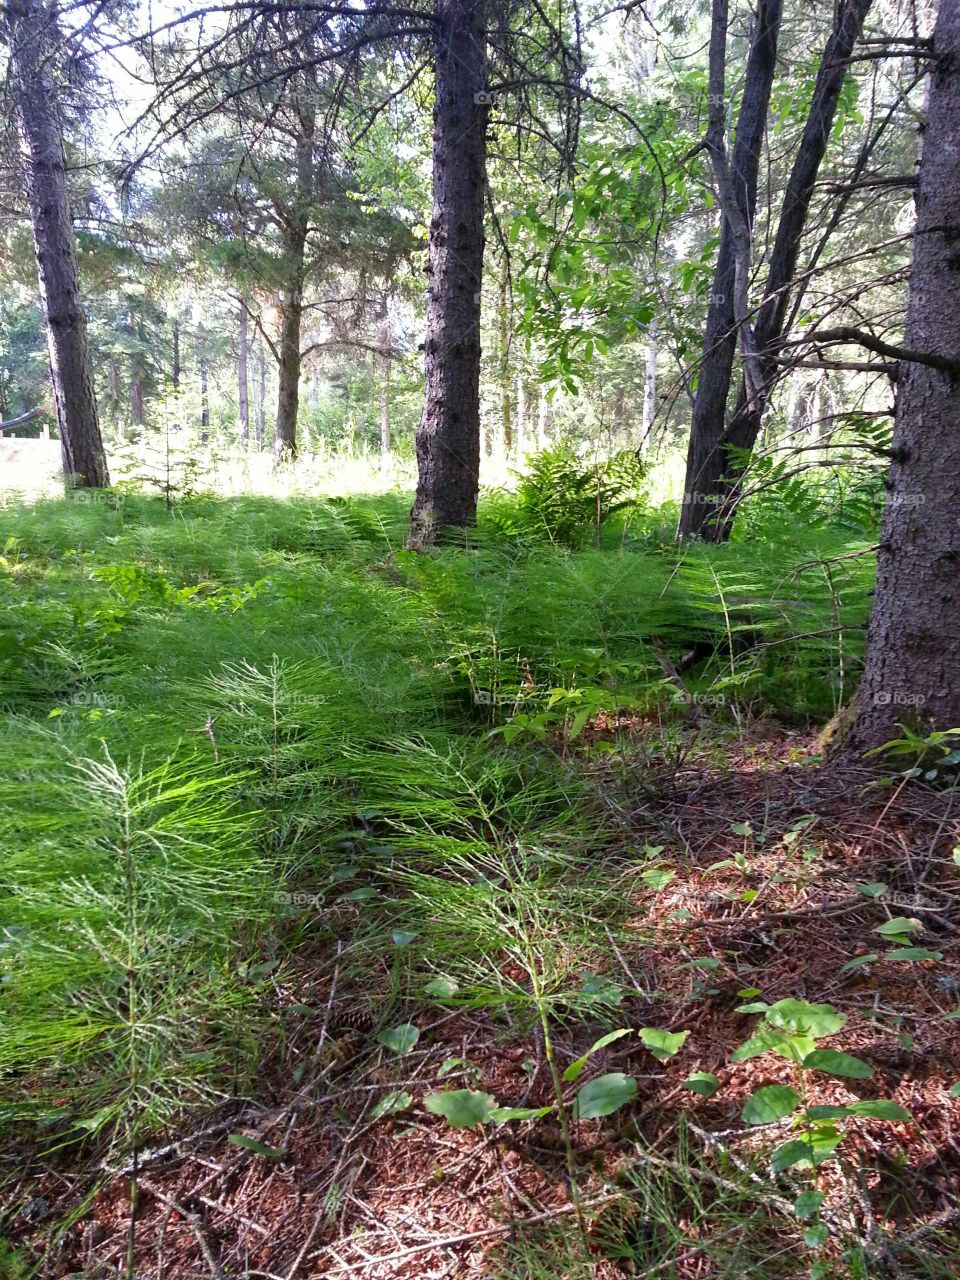 Understory vegetation in a forest